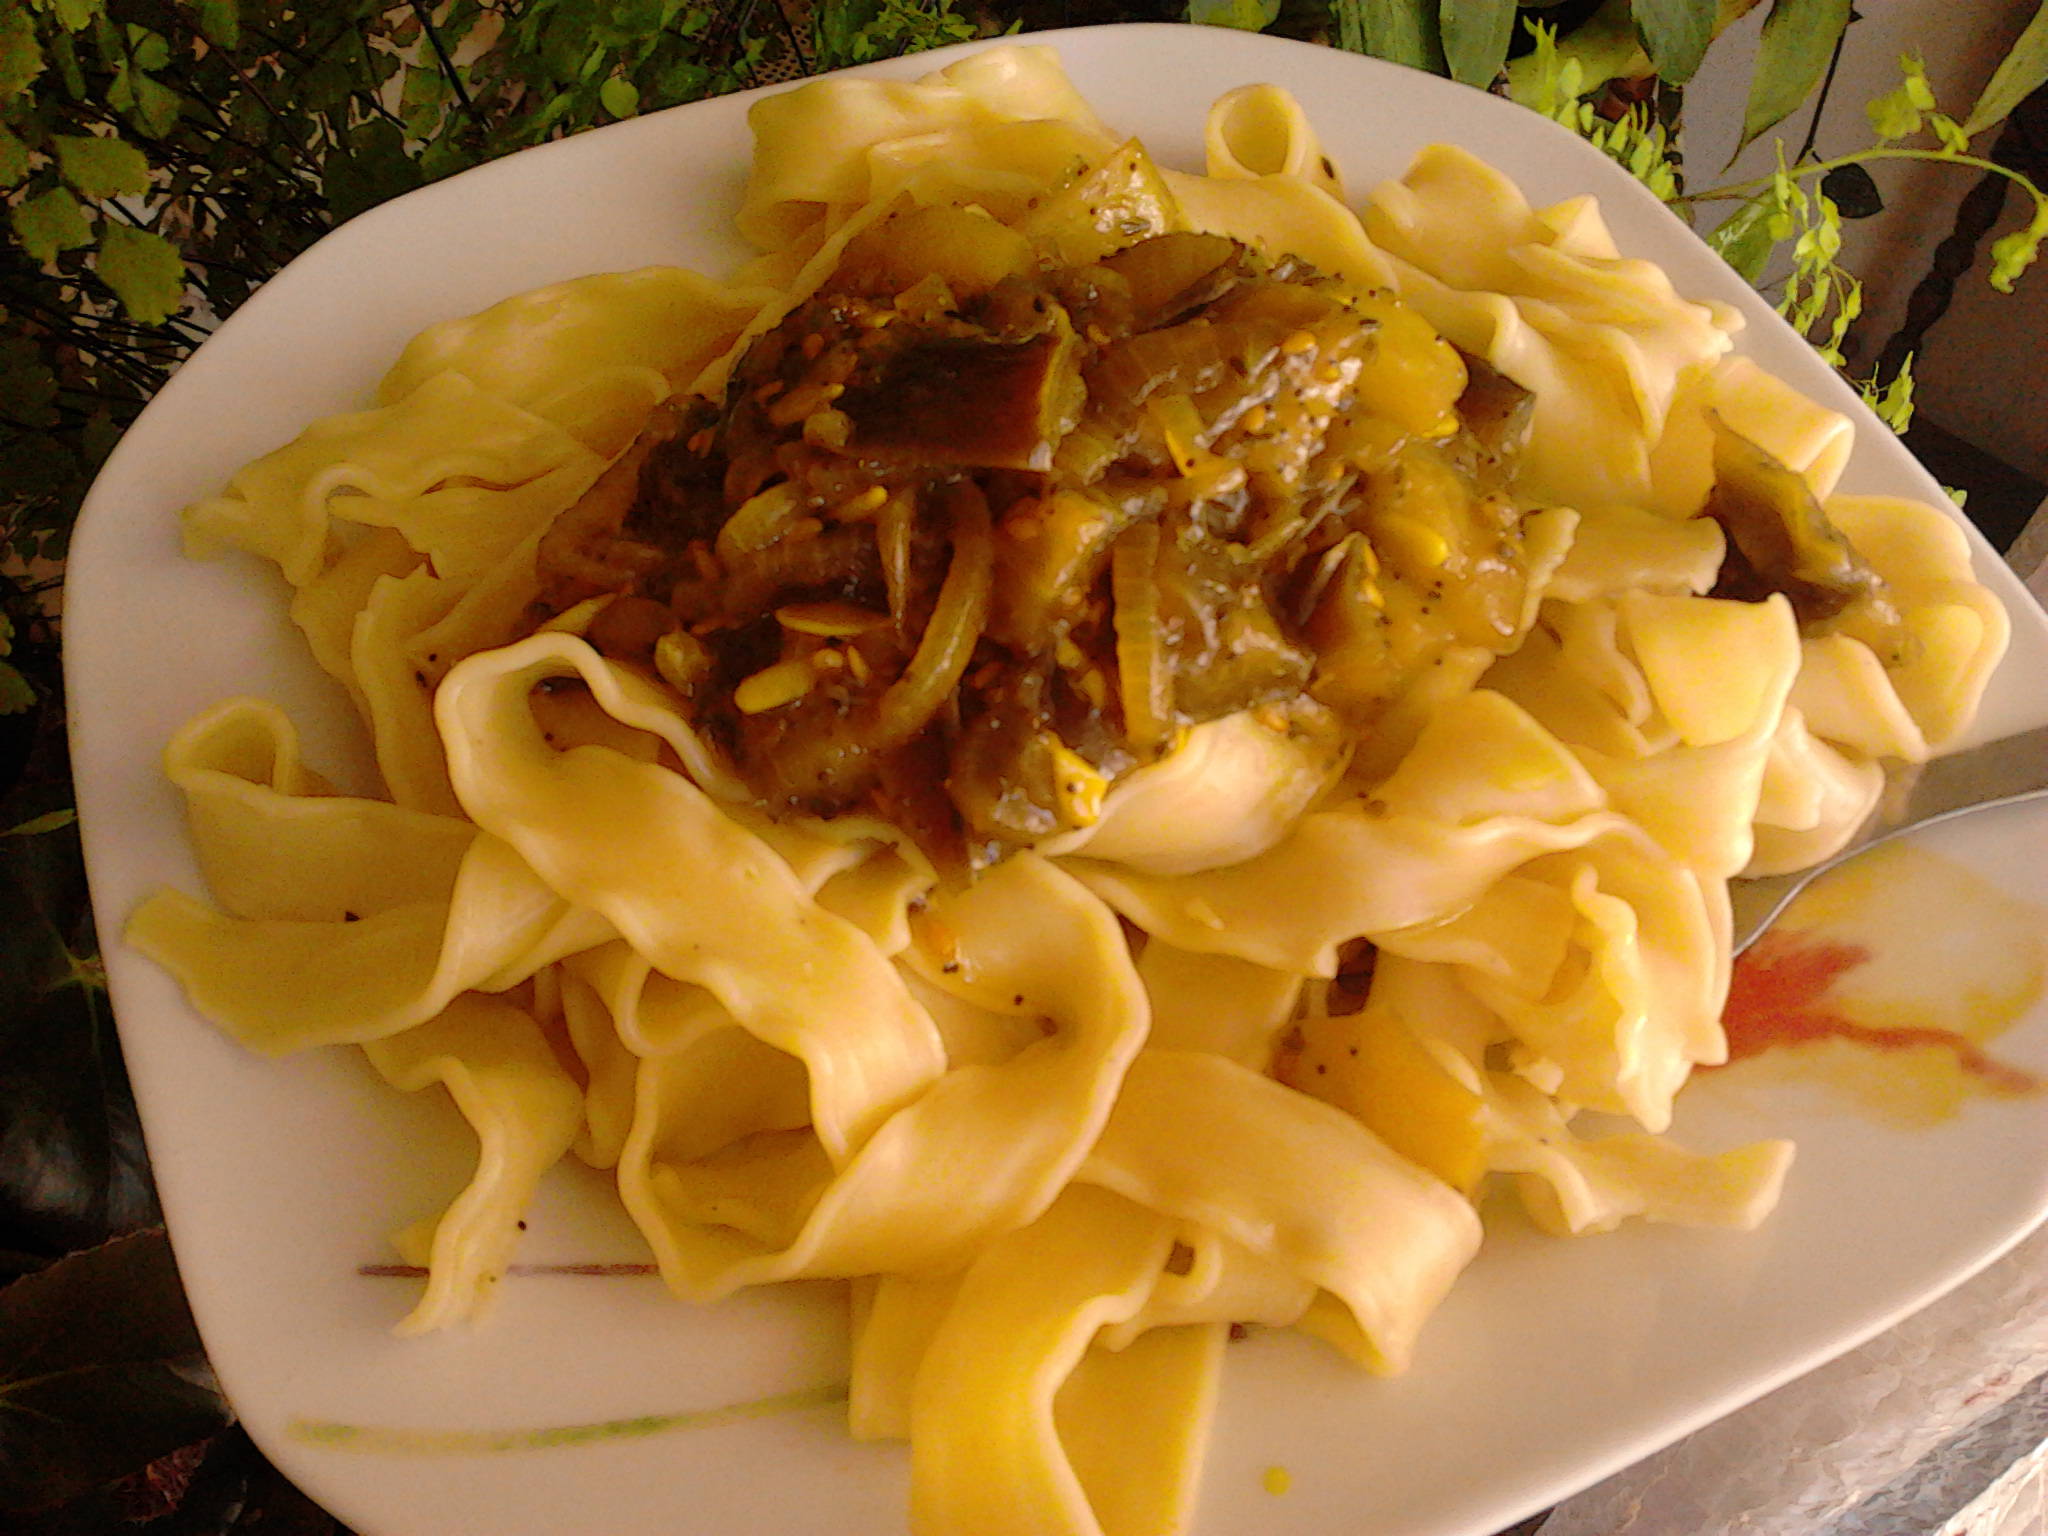 Tagliatelle with vegetables on the plate